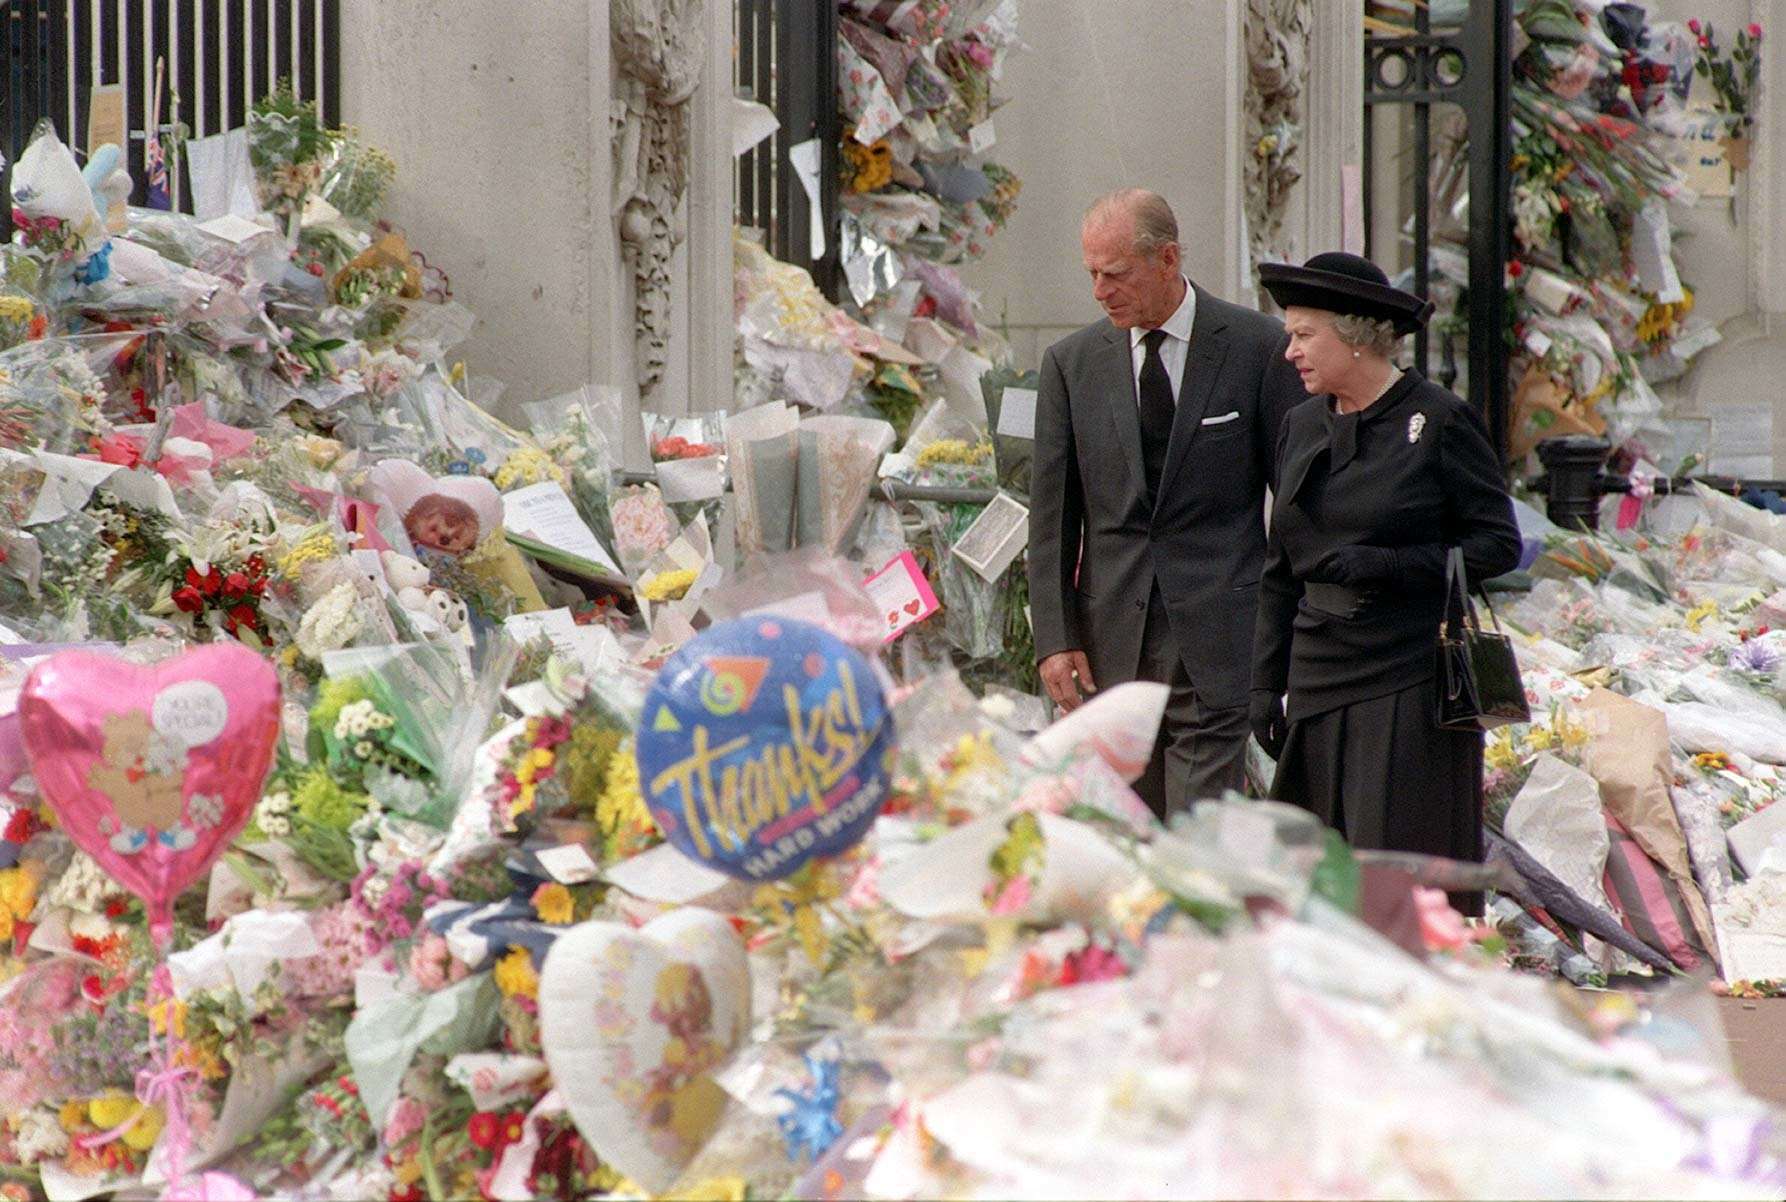 The Queen and the Duke of Edinburgh view the floral tributes to Diana, Princess of Wales, at Buckingham Palace (John Stillwell/PA)